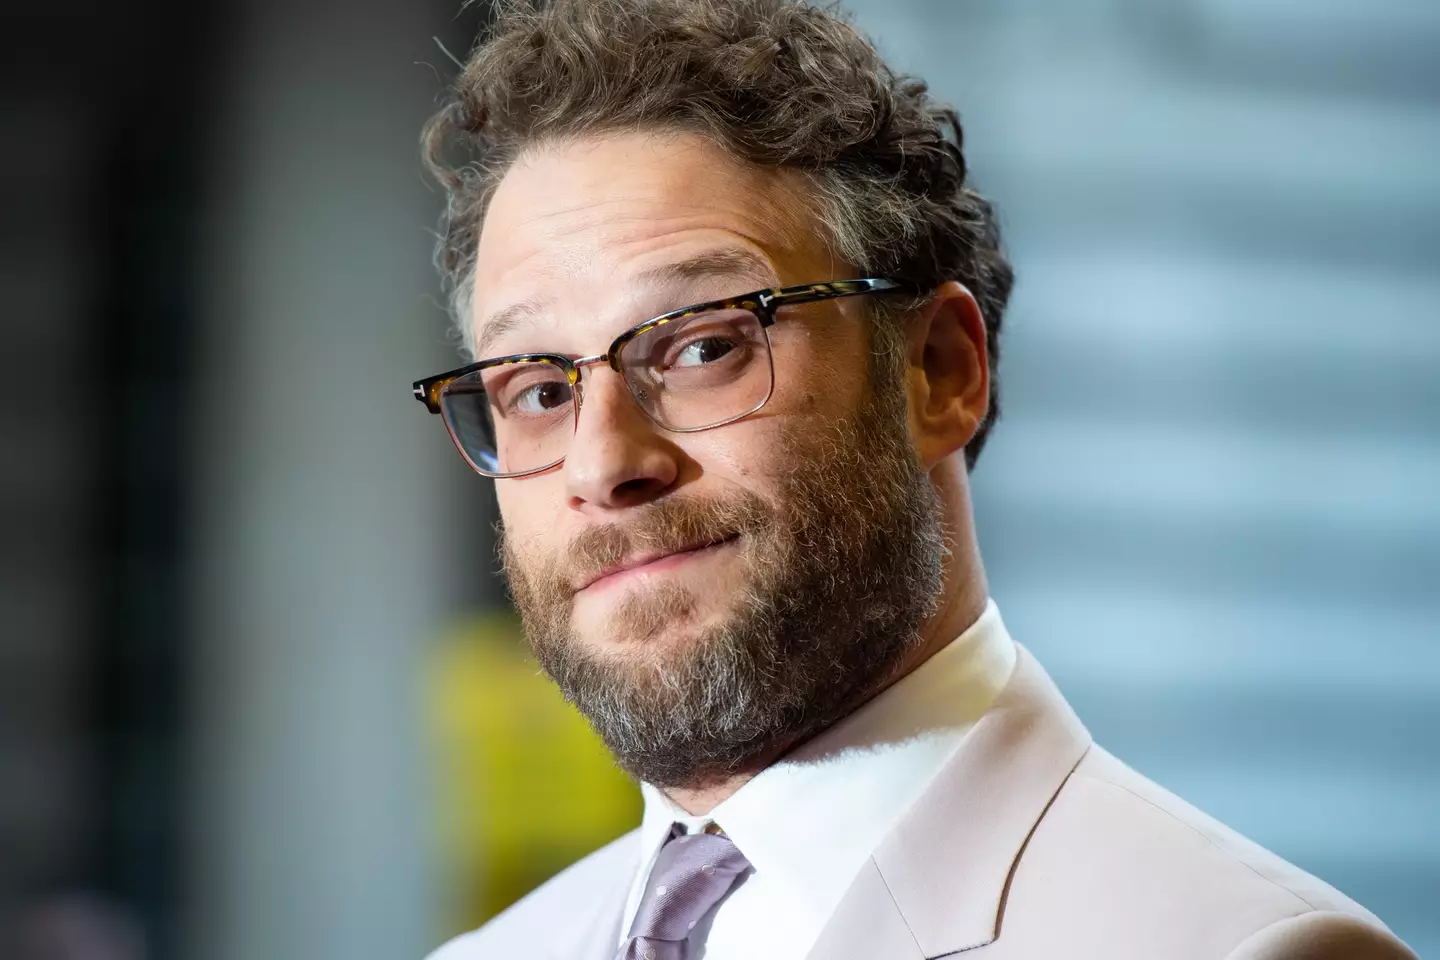 Seth Rogen has said he smokes weed ‘all day every day’.